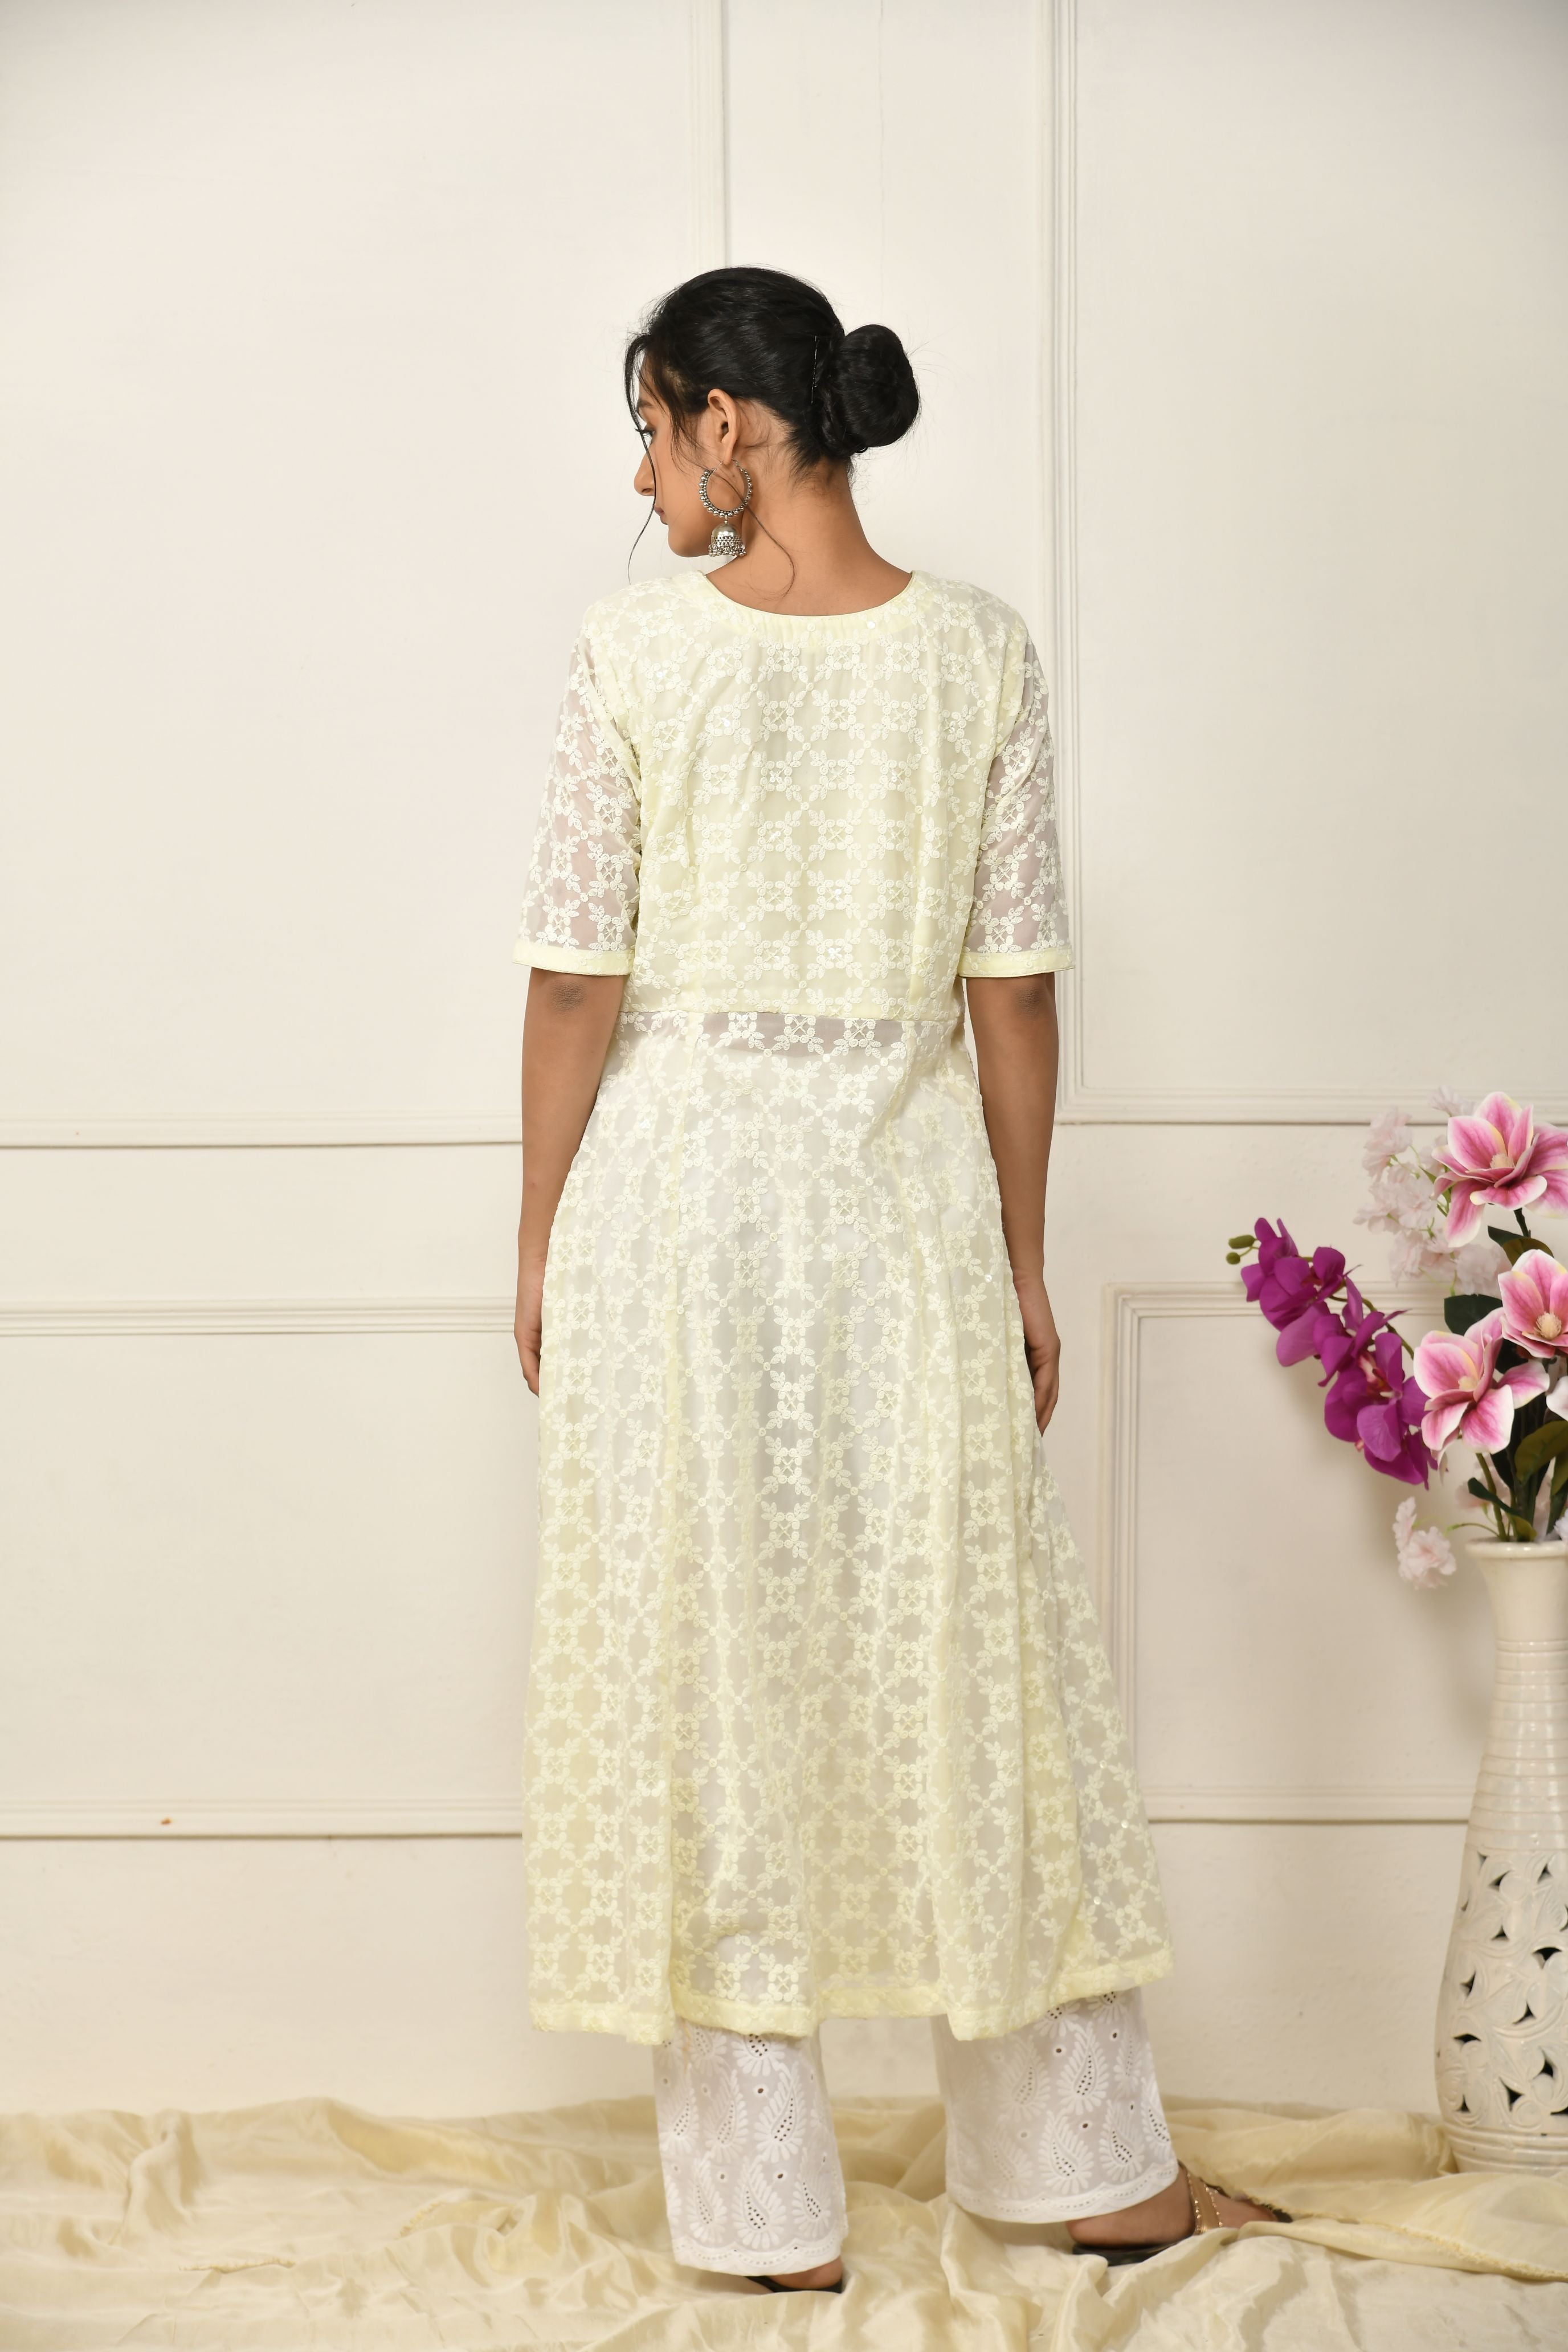 Lemon yellow georgette thread embroidered flared top with a front slit and a yoke lining